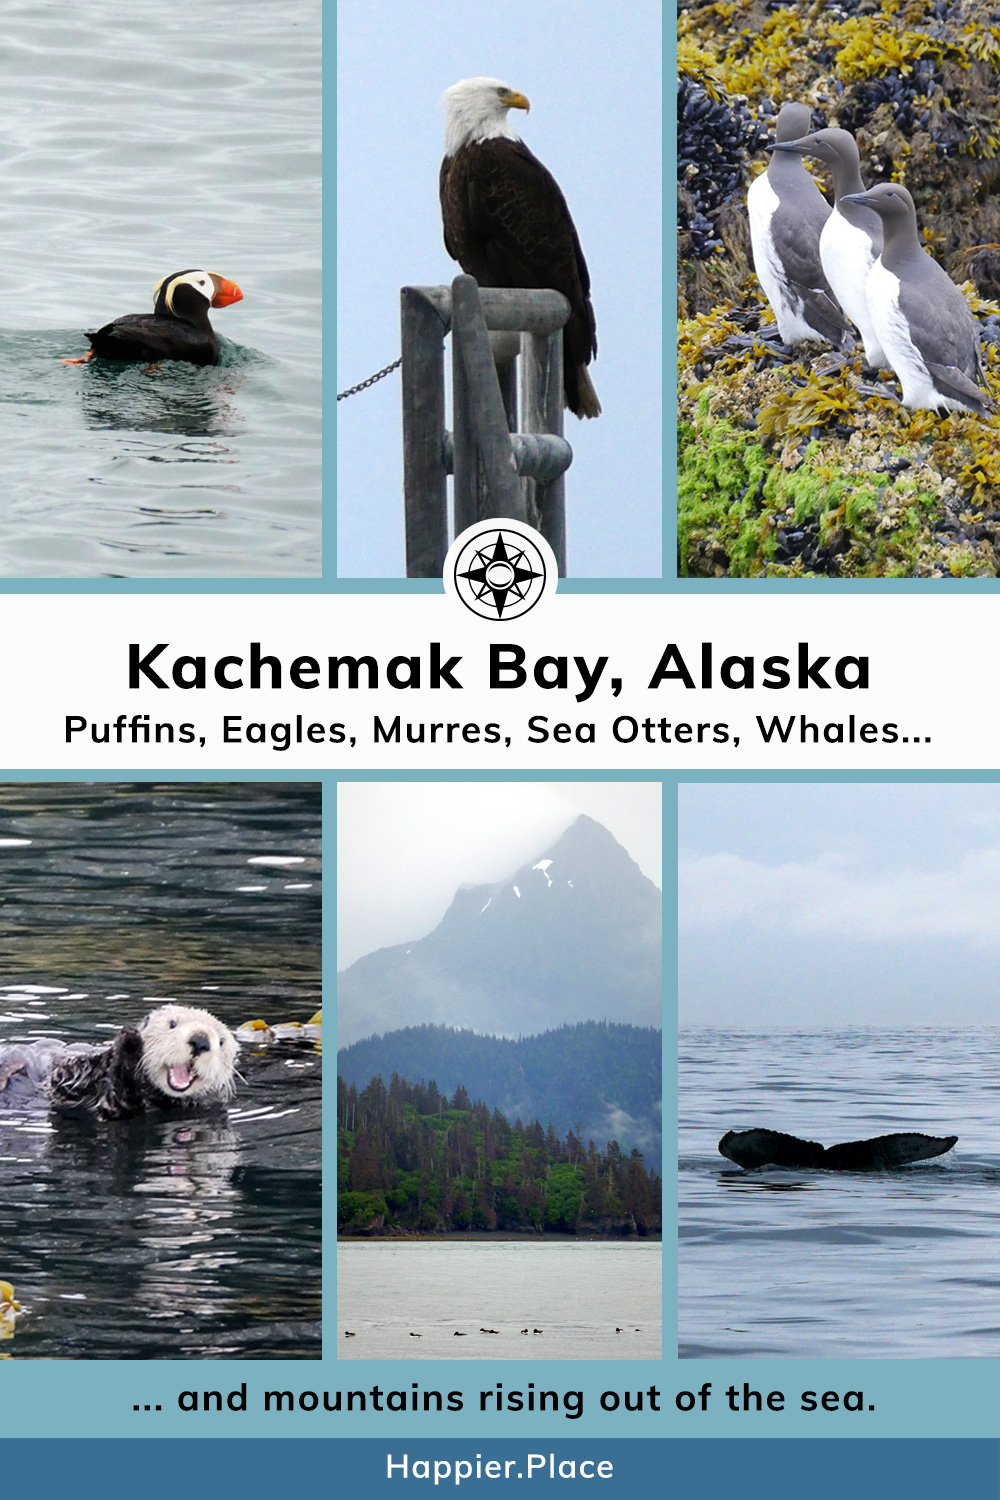 Kachemak Bay and Homer Alaska where you can see puffins, eagles, murres, sea otters, and whales - and mountains rising from the sea. #HappierPlace #Alaska